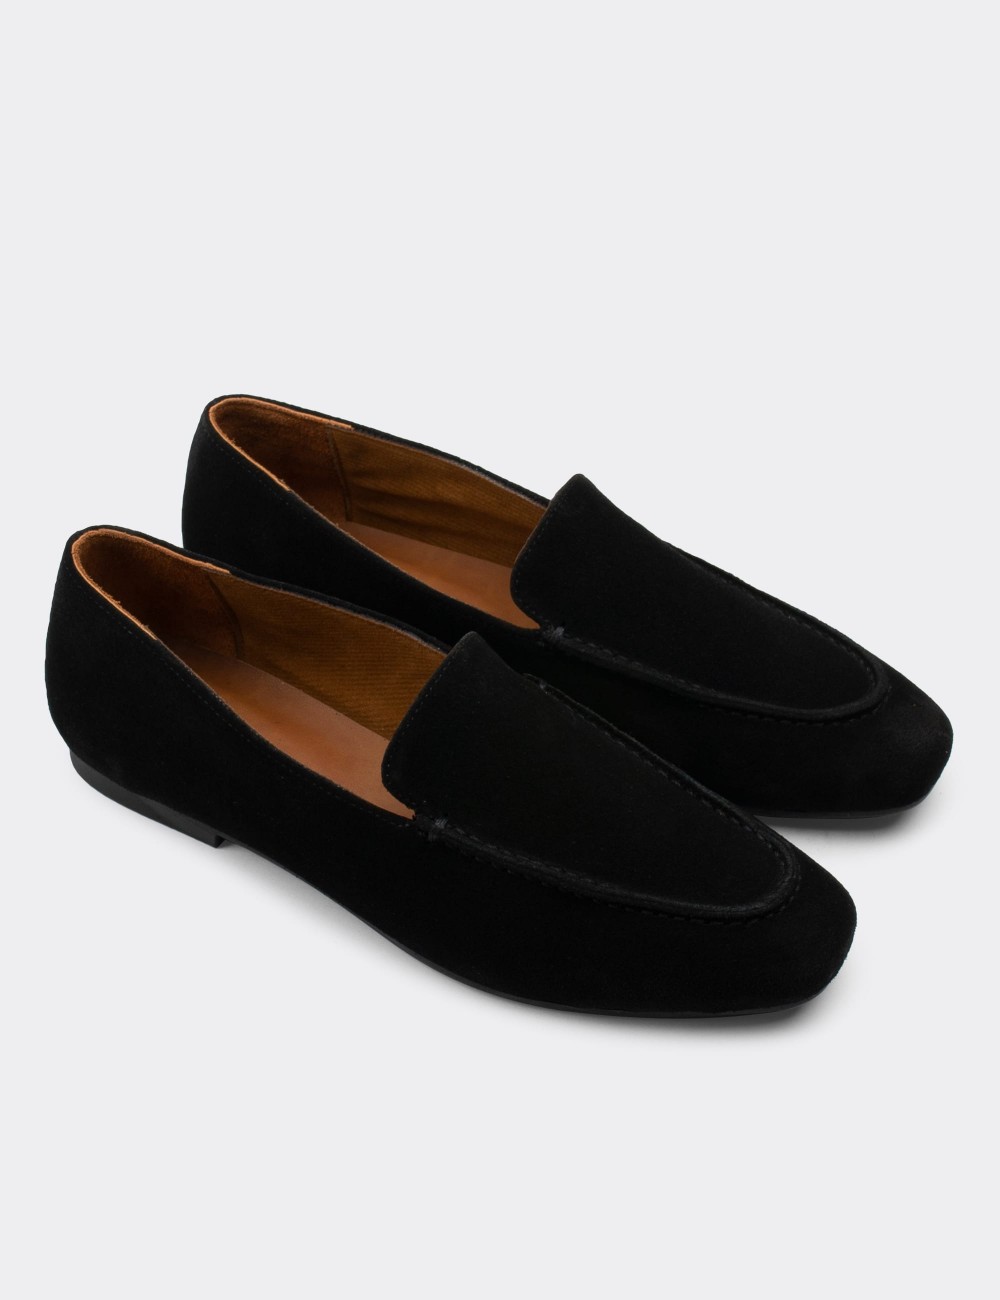 Black Suede Leather Loafers Shoes - 01990ZSYHC01